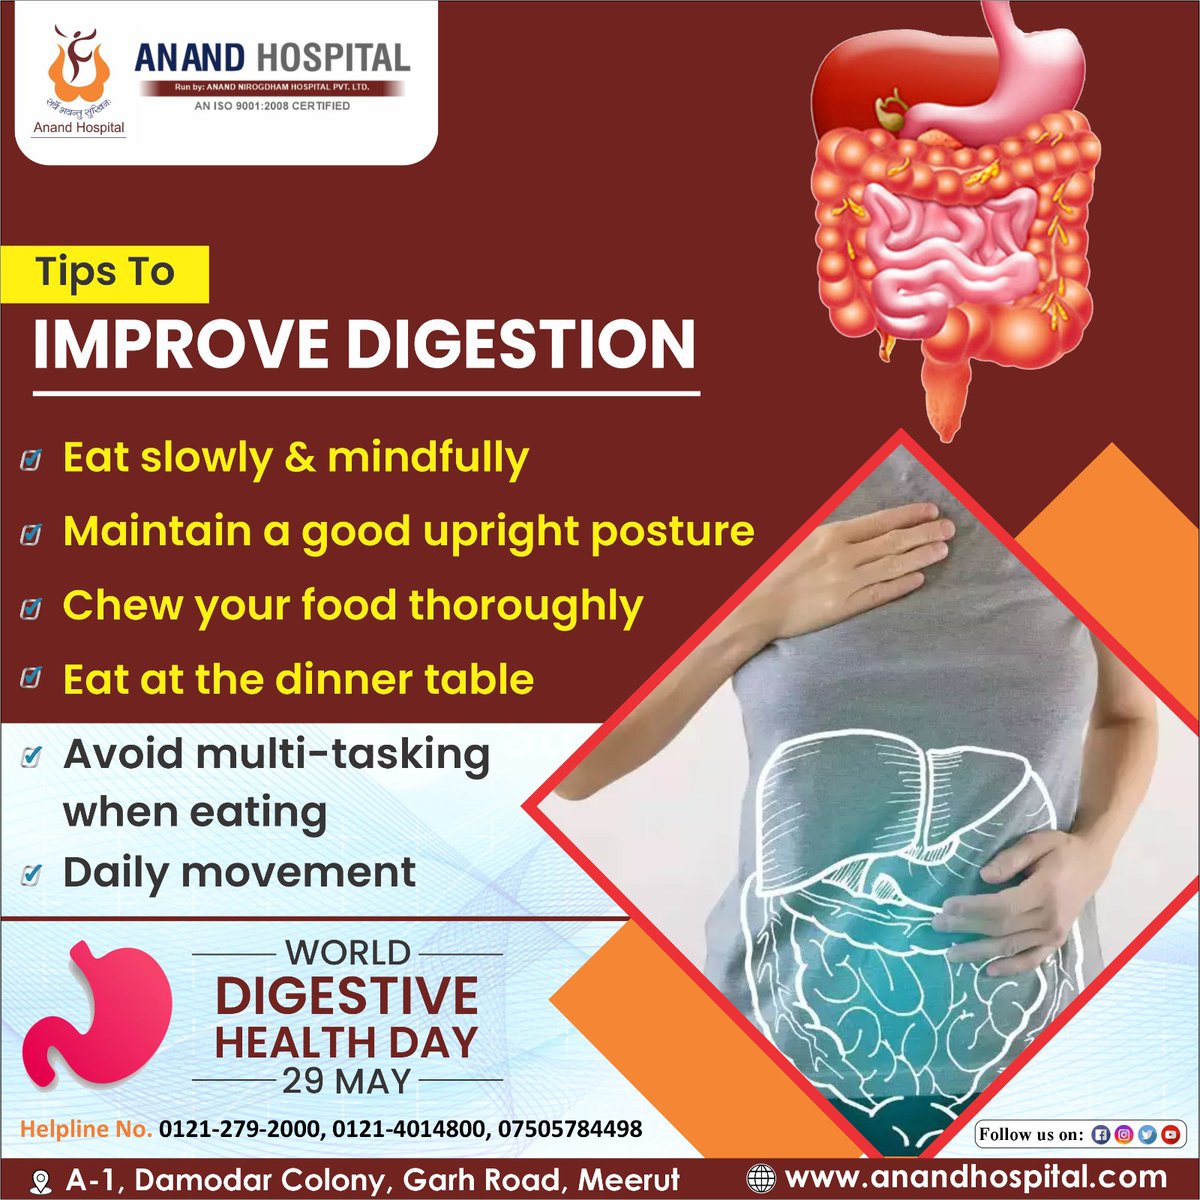 Tips To IMPROVE DIGESTION 🌟

✔️ 🍽️ Eat slowly & mindfully
✔️ 🧍‍♂️ Maintain a good upright posture

🌍 WORLD DIGESTIVE HEALTH DAY 🌍
29 MAY

.
#ImproveDigestion #DigestiveHealth #HealthyEating #MindfulEating #EatSlowly #ChewThoroughly #GoodPosture #NoMultitasking #StayActive